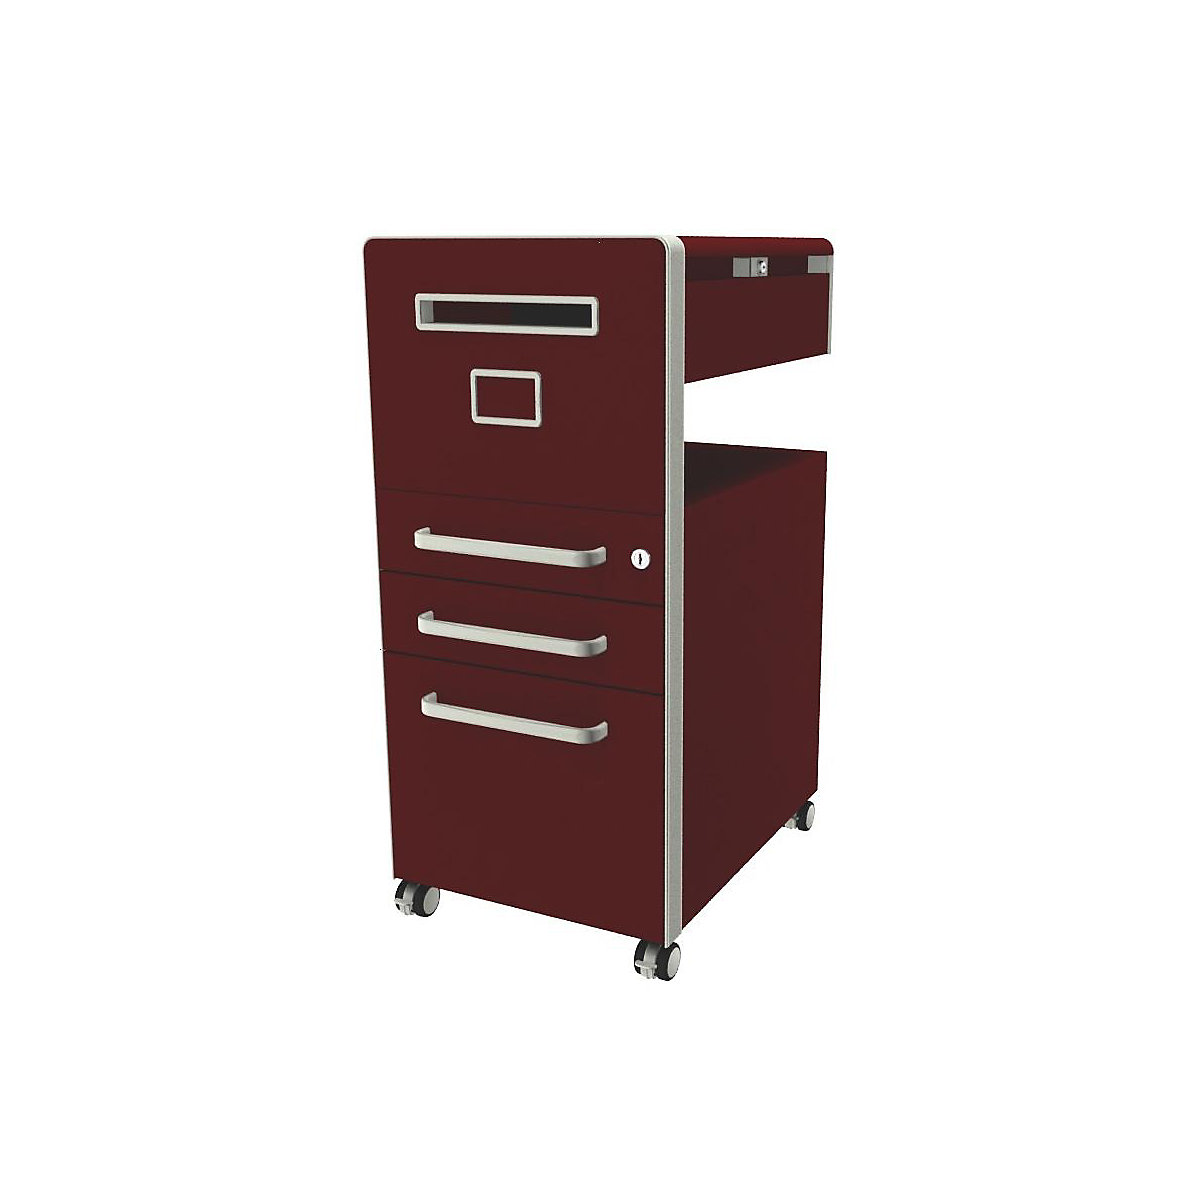 Bite™ pedestal furniture, with 1 whiteboard, opens on the left side – BISLEY, with 2 universal drawers, 1 suspension file drawer, sepia brown-30